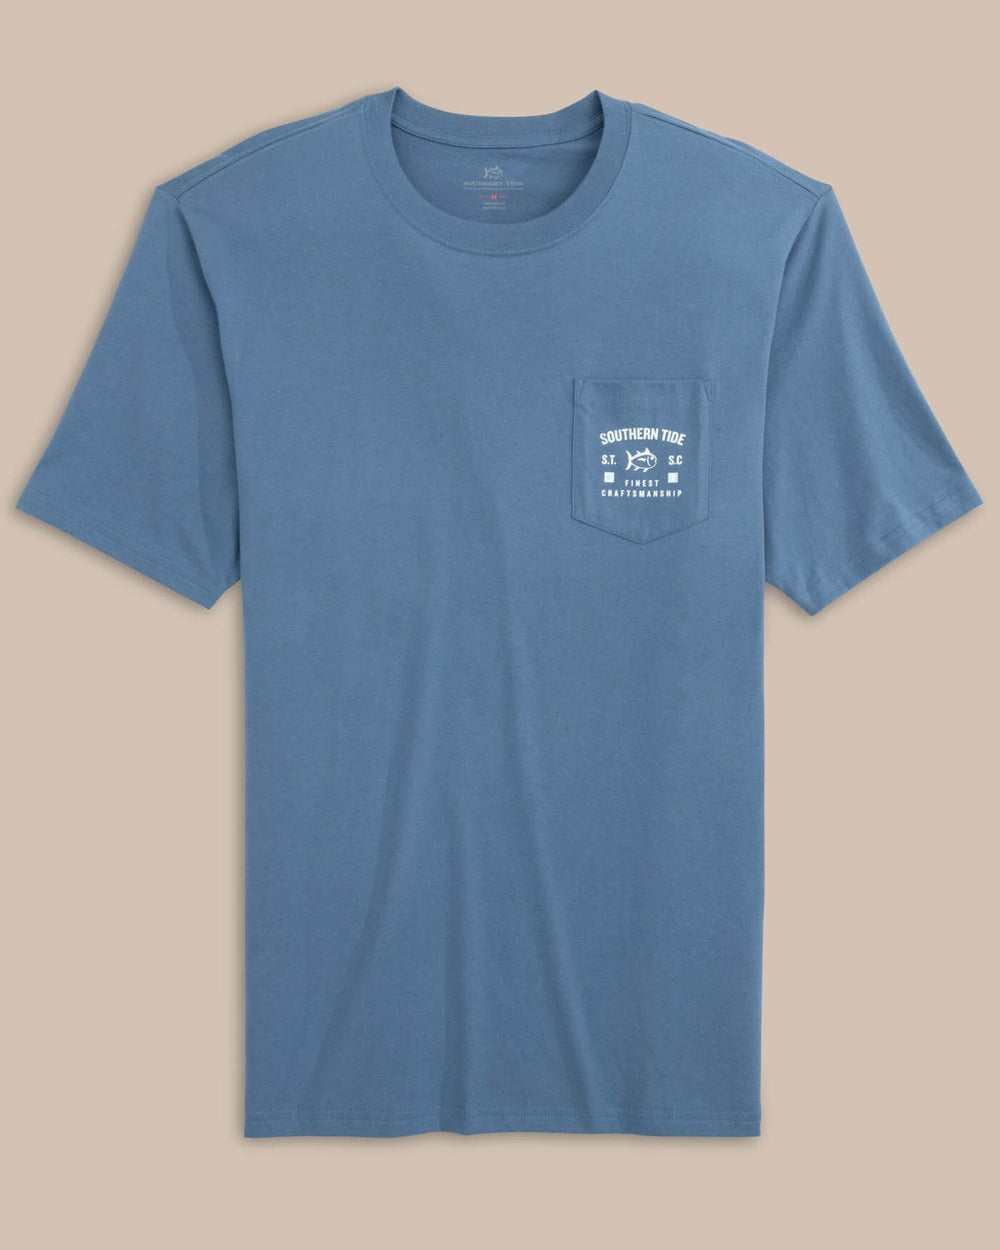 The front view of the Southern Tide Finest Craftsmanship Short Sleeve T-Shirt by Southern Tide - Coronet Blue